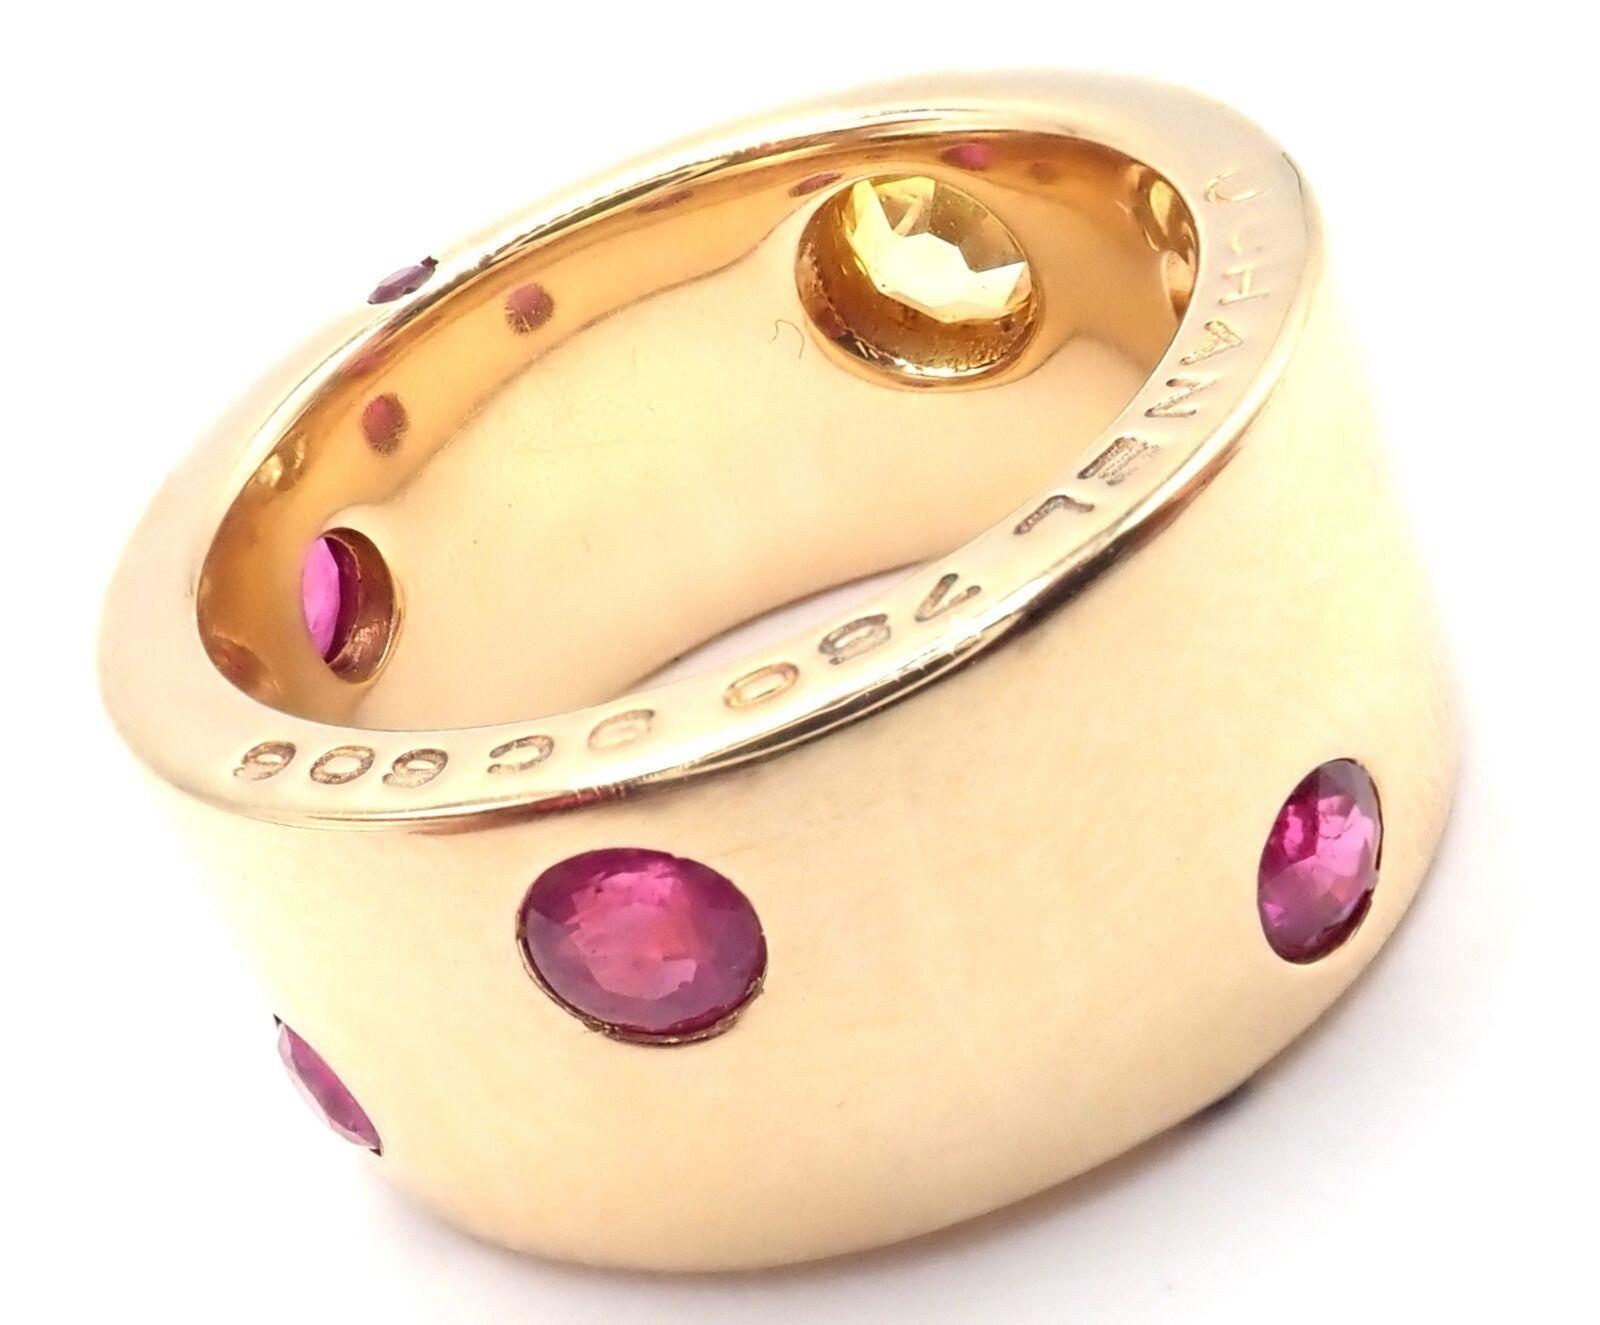 18k Yellow Gold Ruby And Yellow Sapphire Wide Band Ring by Chanel. 
With 1 Yellow Sapphire totaling .10ct
6 rubies 3mm each
1 small ruby on the side
Details: 
Ring Size: 5
Width: 10mm
Weight: 16.5 grams
Stamped Hallmarks: Chanel 750 9C606 1A1251